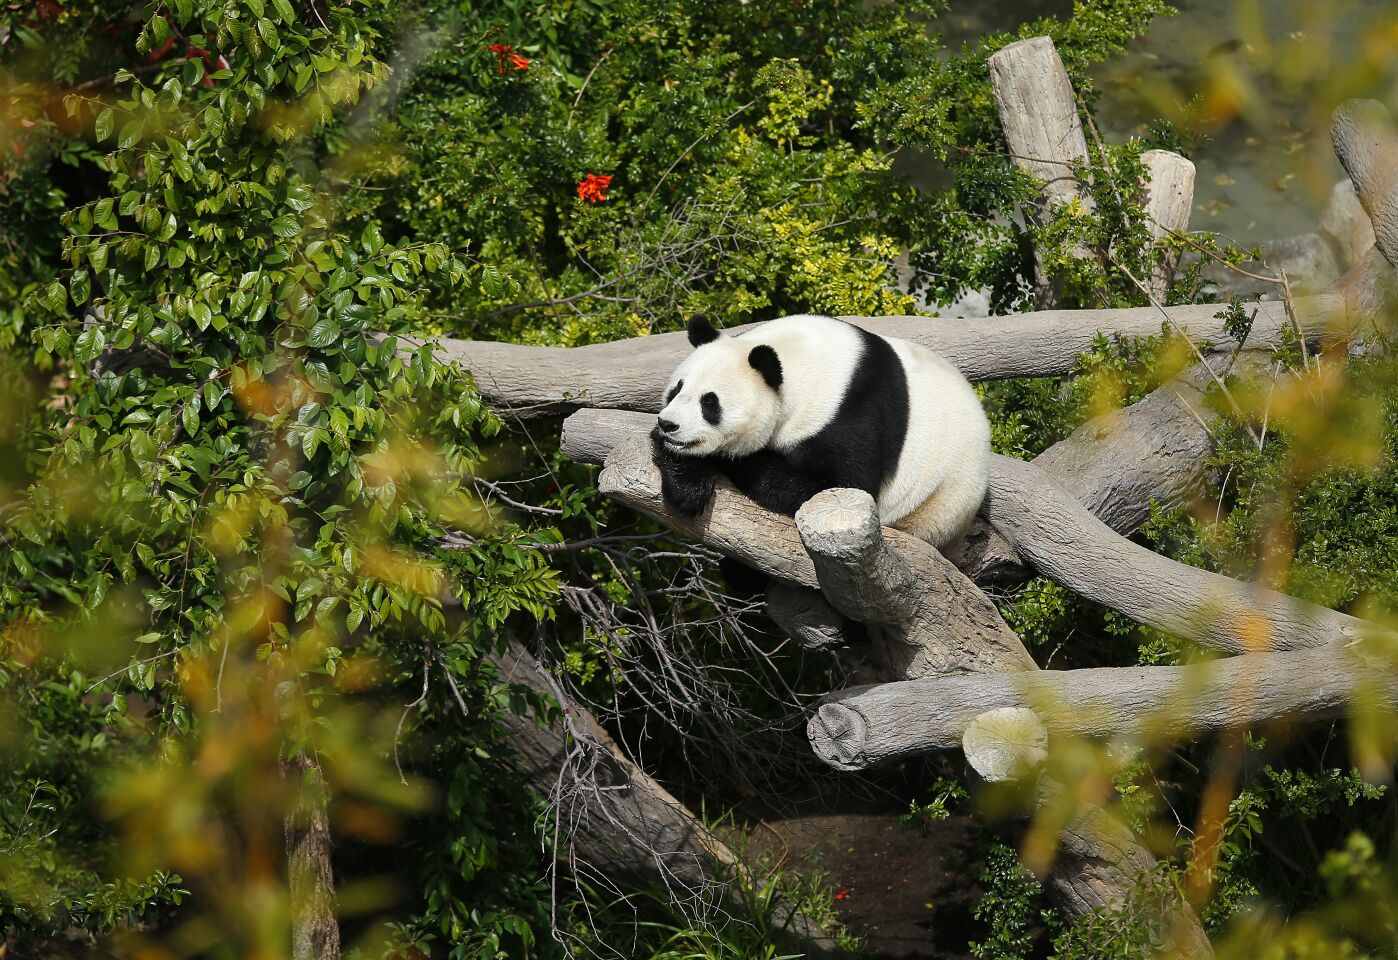 Panda Bai Yun, 27, climbs in her enclosure at the San Diego Zoo on April 16, 2019. The last public day to see the pandas is April 29th, before they head back to China.